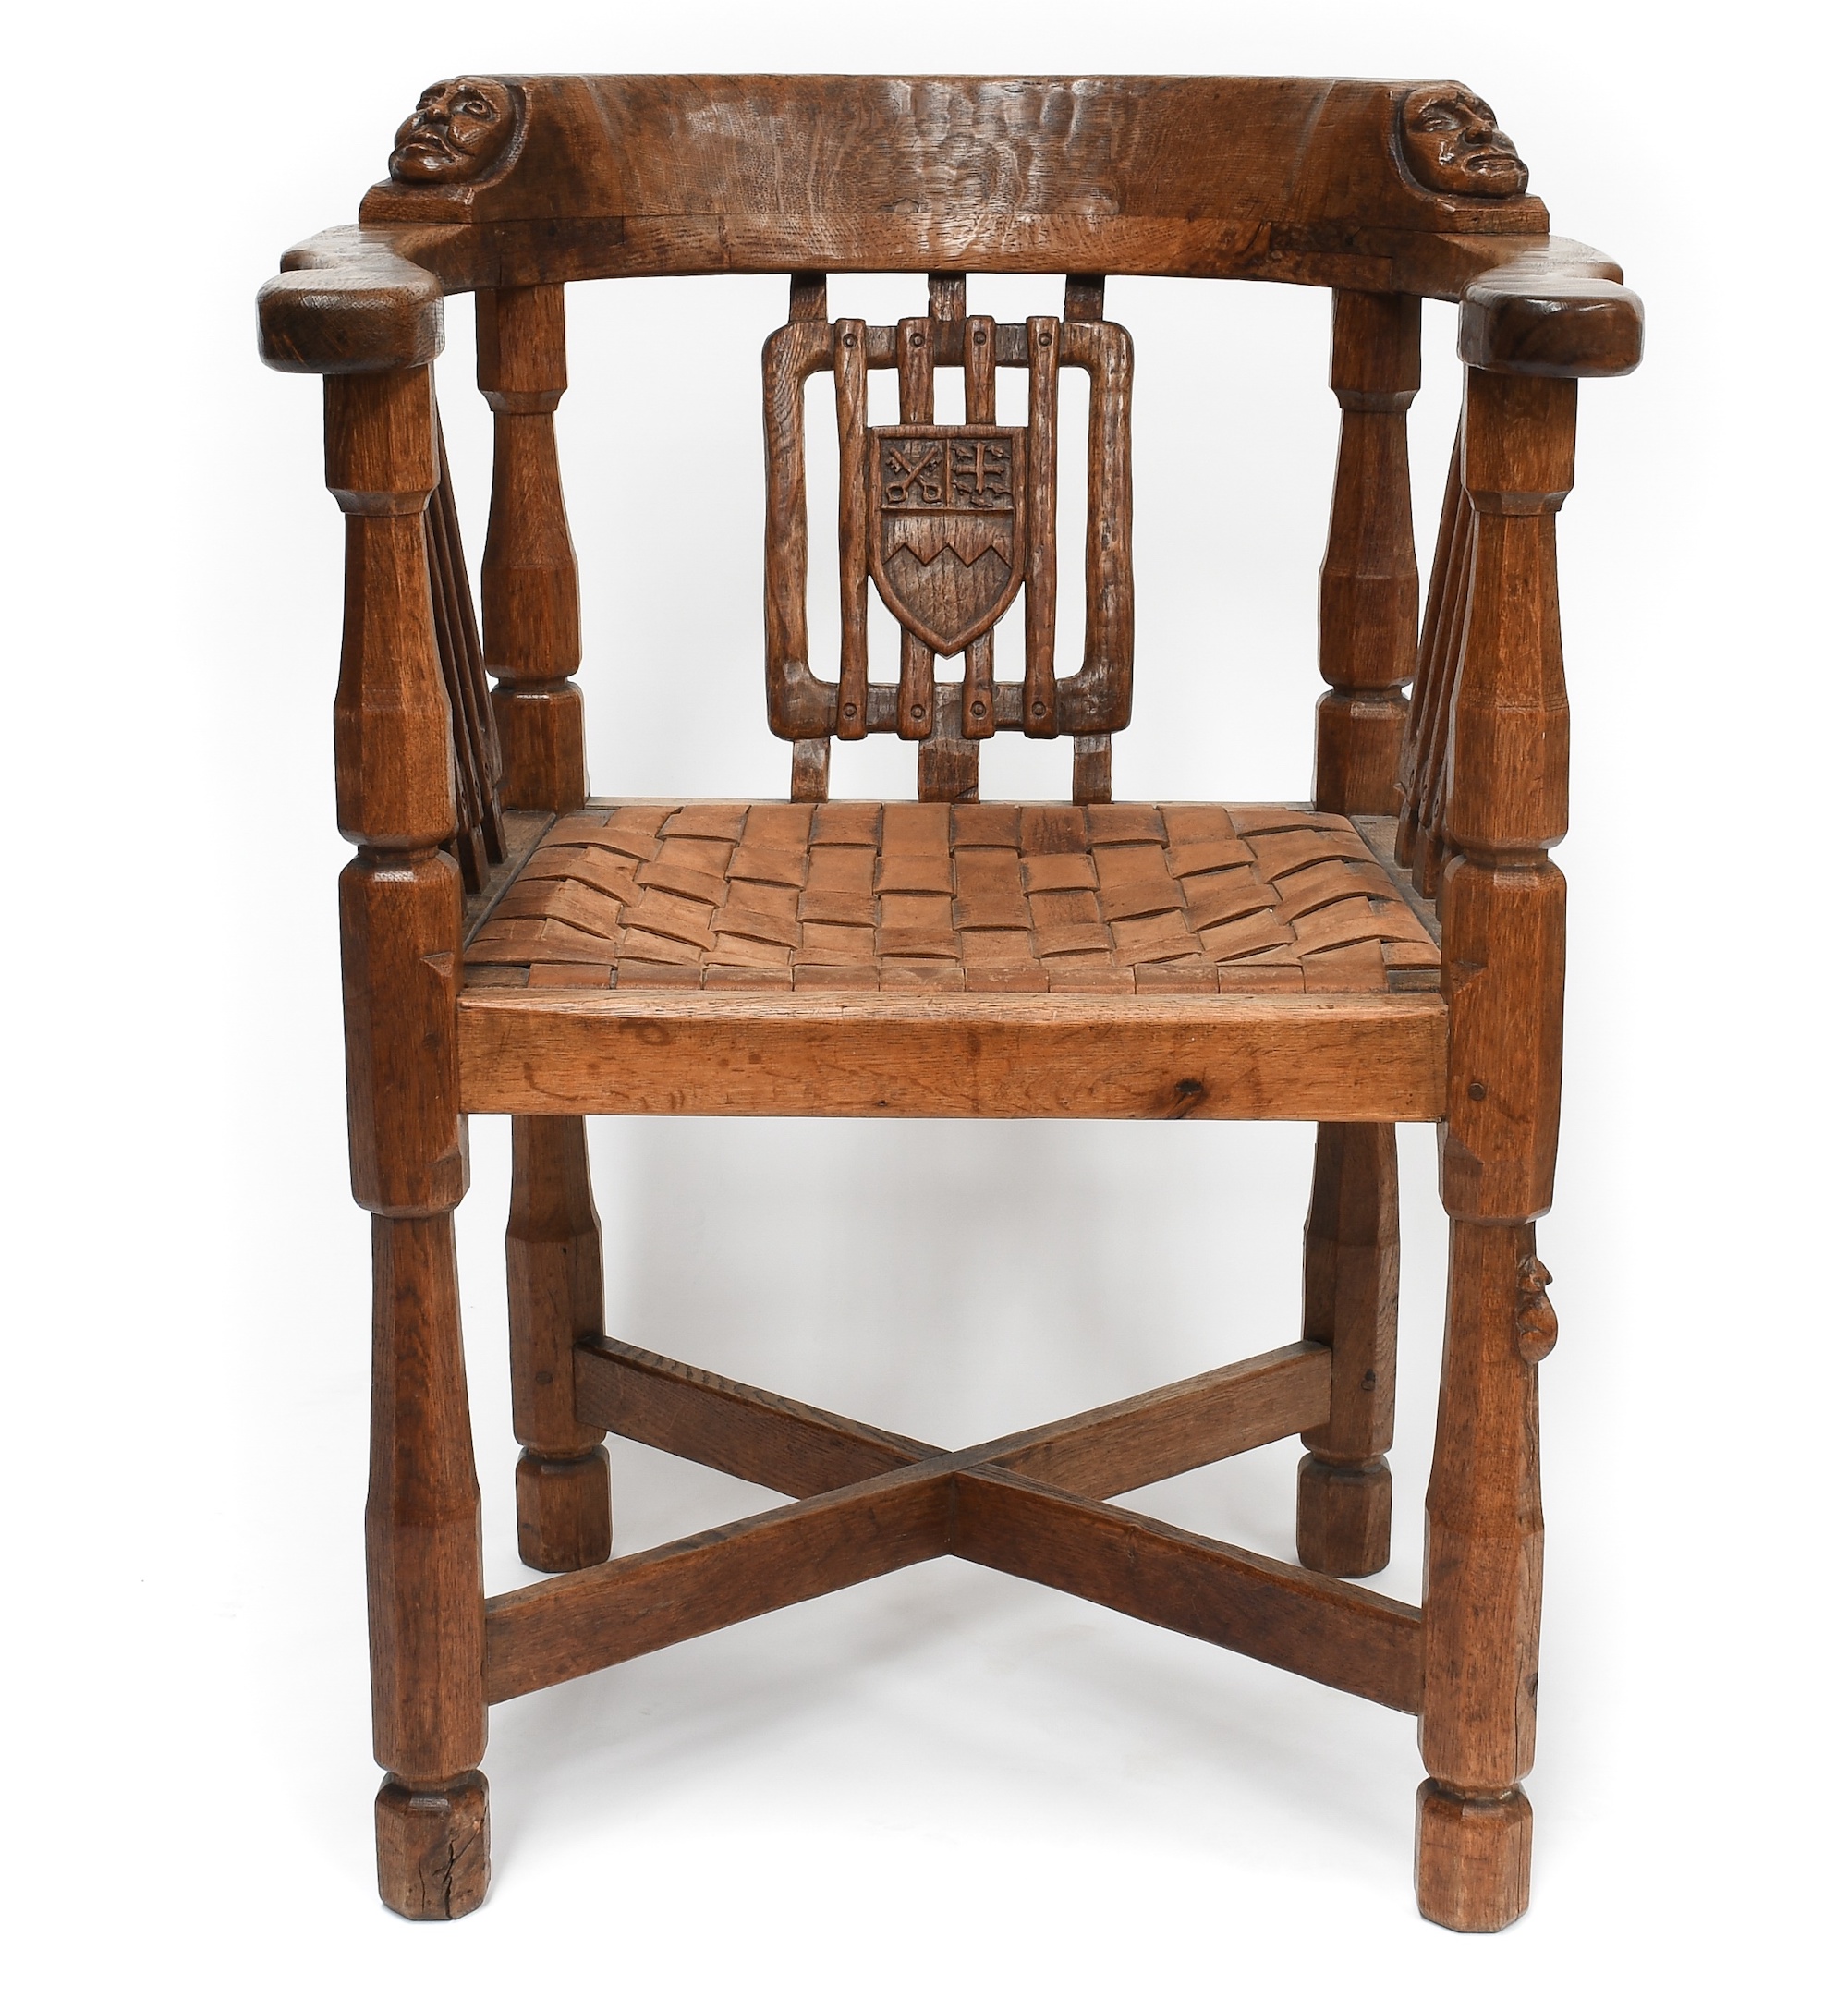 A Robert ‘Mouseman’ Thompson English Oak Monk’s Chair, with Coat of Arms for Ampleforth Abbey